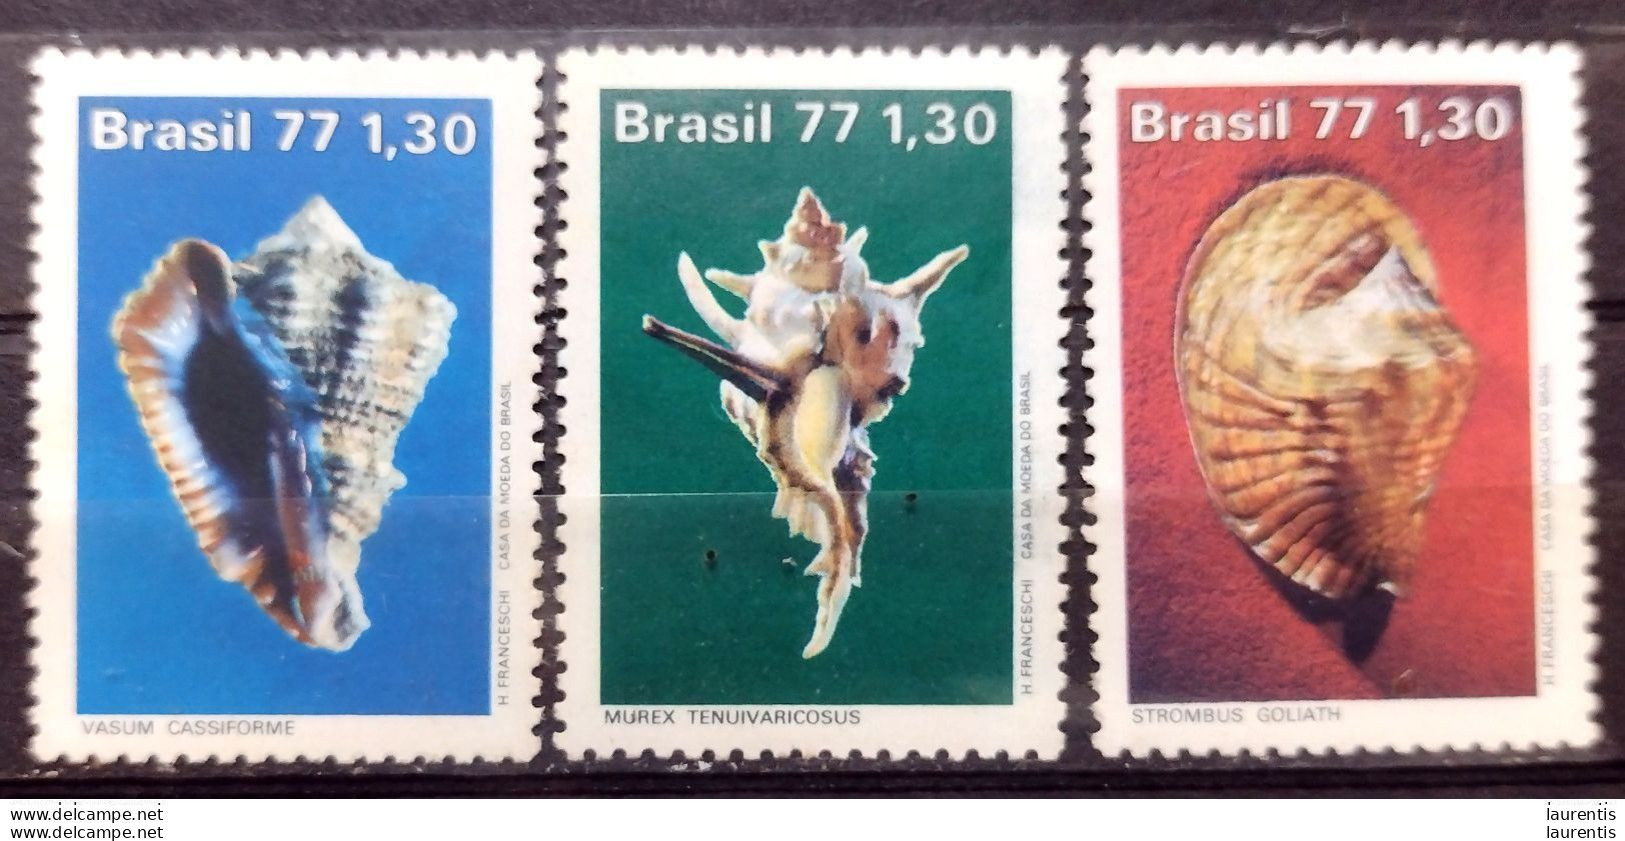 D2599  Shells - Coquillages - Brasil 1977 - MNH - 1,75 (20-270) - Conchas